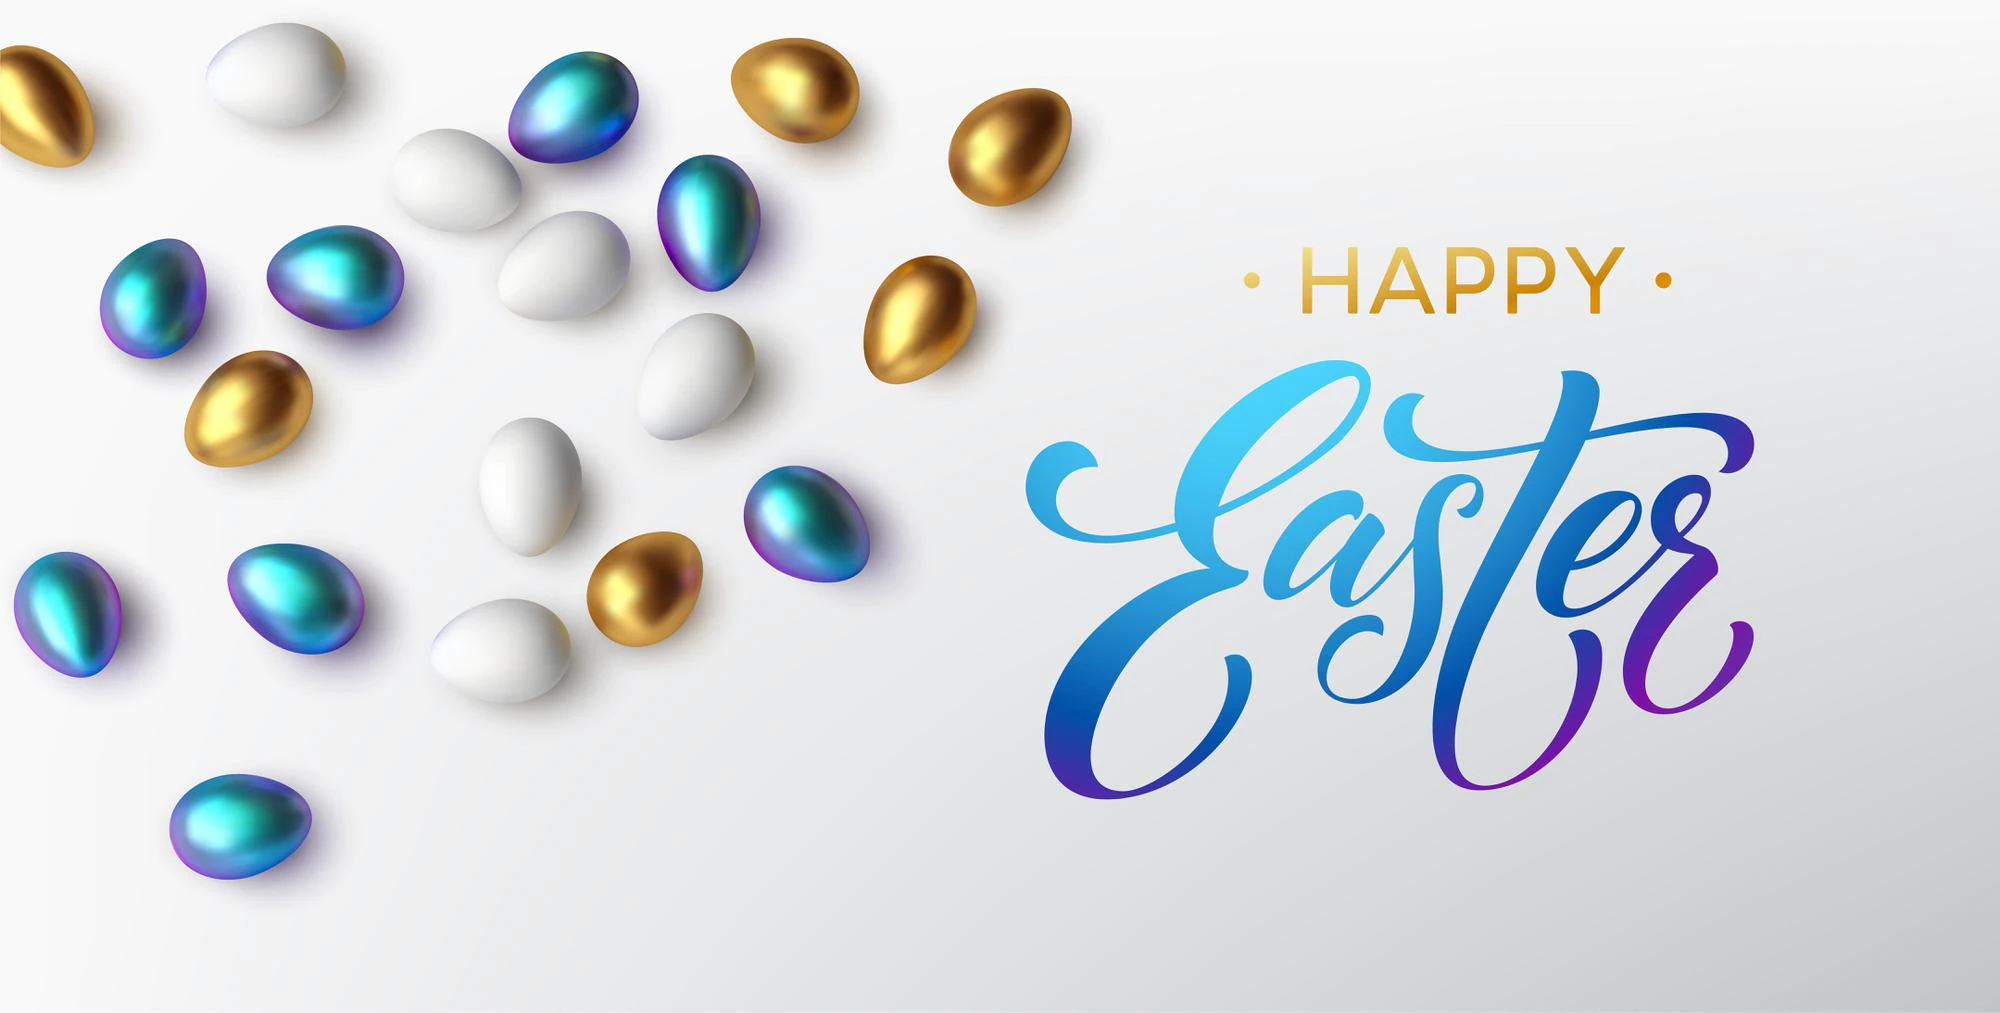 Modern Trendy Golden Metallic Shiny Typography Happy Easter Background Easter Eggs 3d Realistic Lettering Design Flyers Leaflets Posters Cards Vector Illustration Eps10 87521 2794